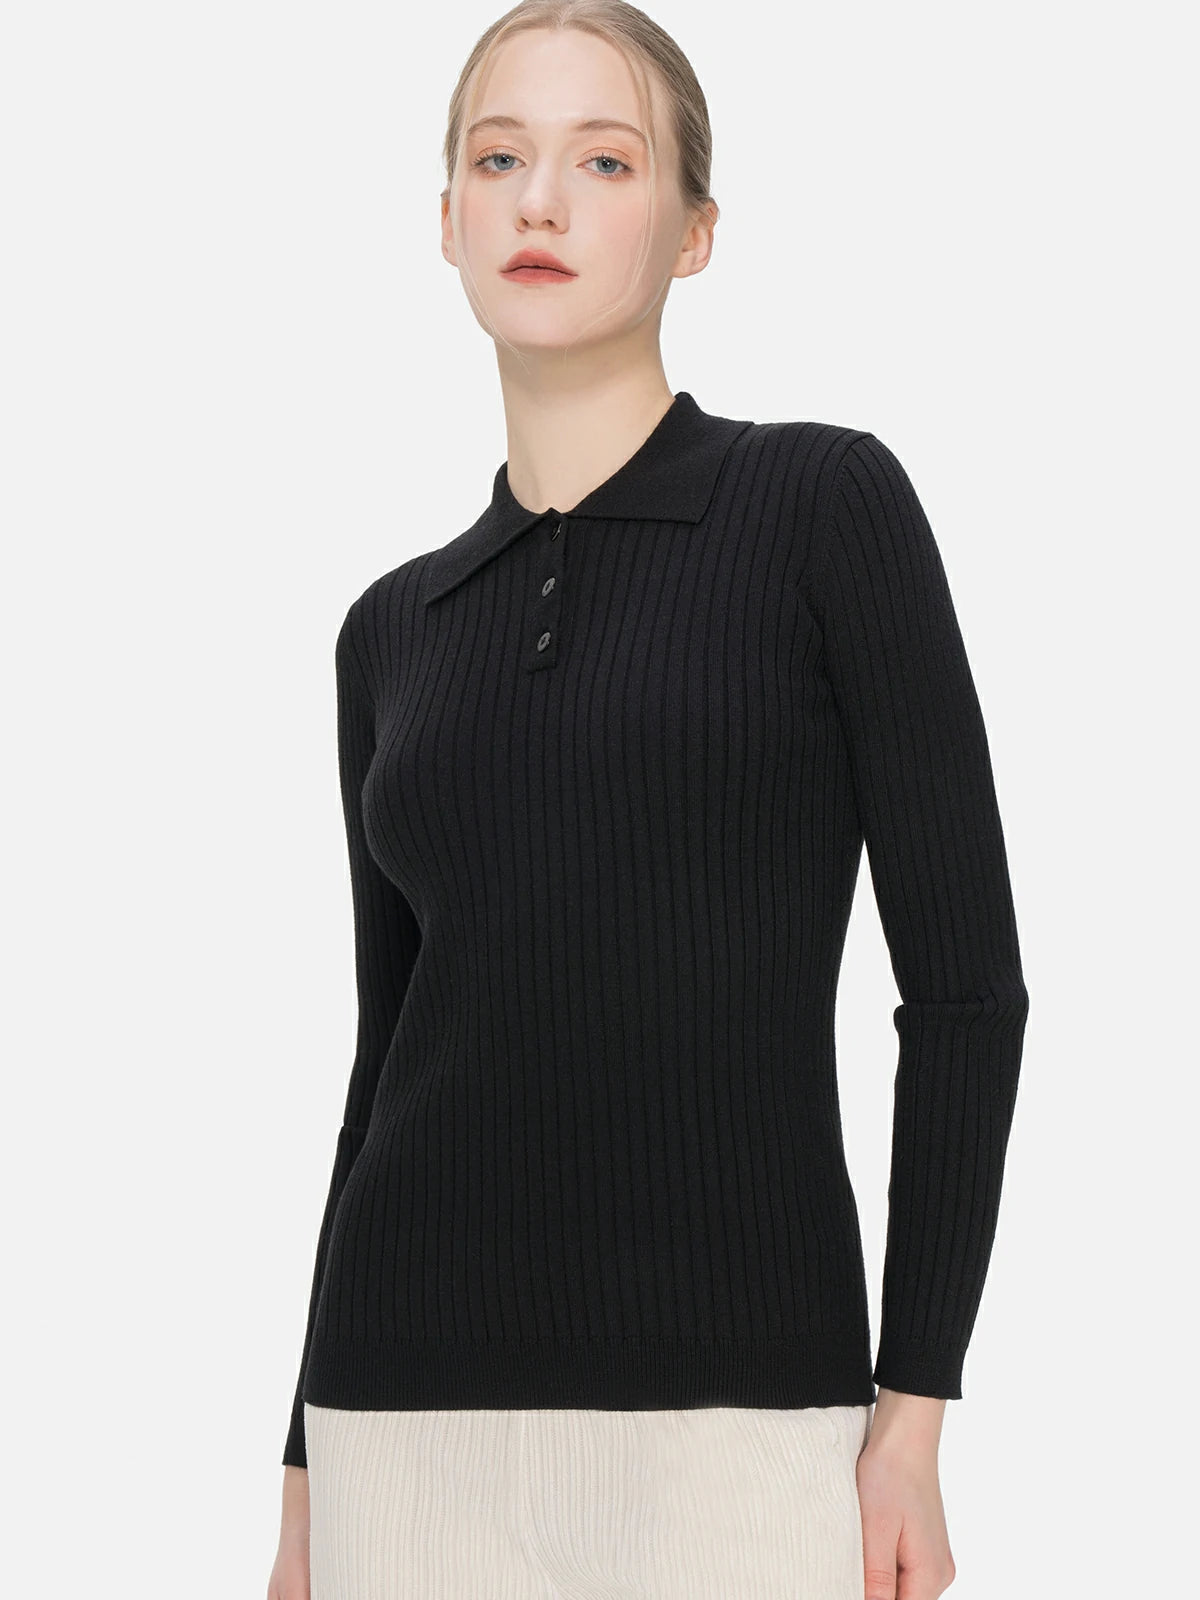 Redefine casual elegance with this black sweater, accentuated by a classic polo collar, a buttoned front design, and a flattering slim fit.